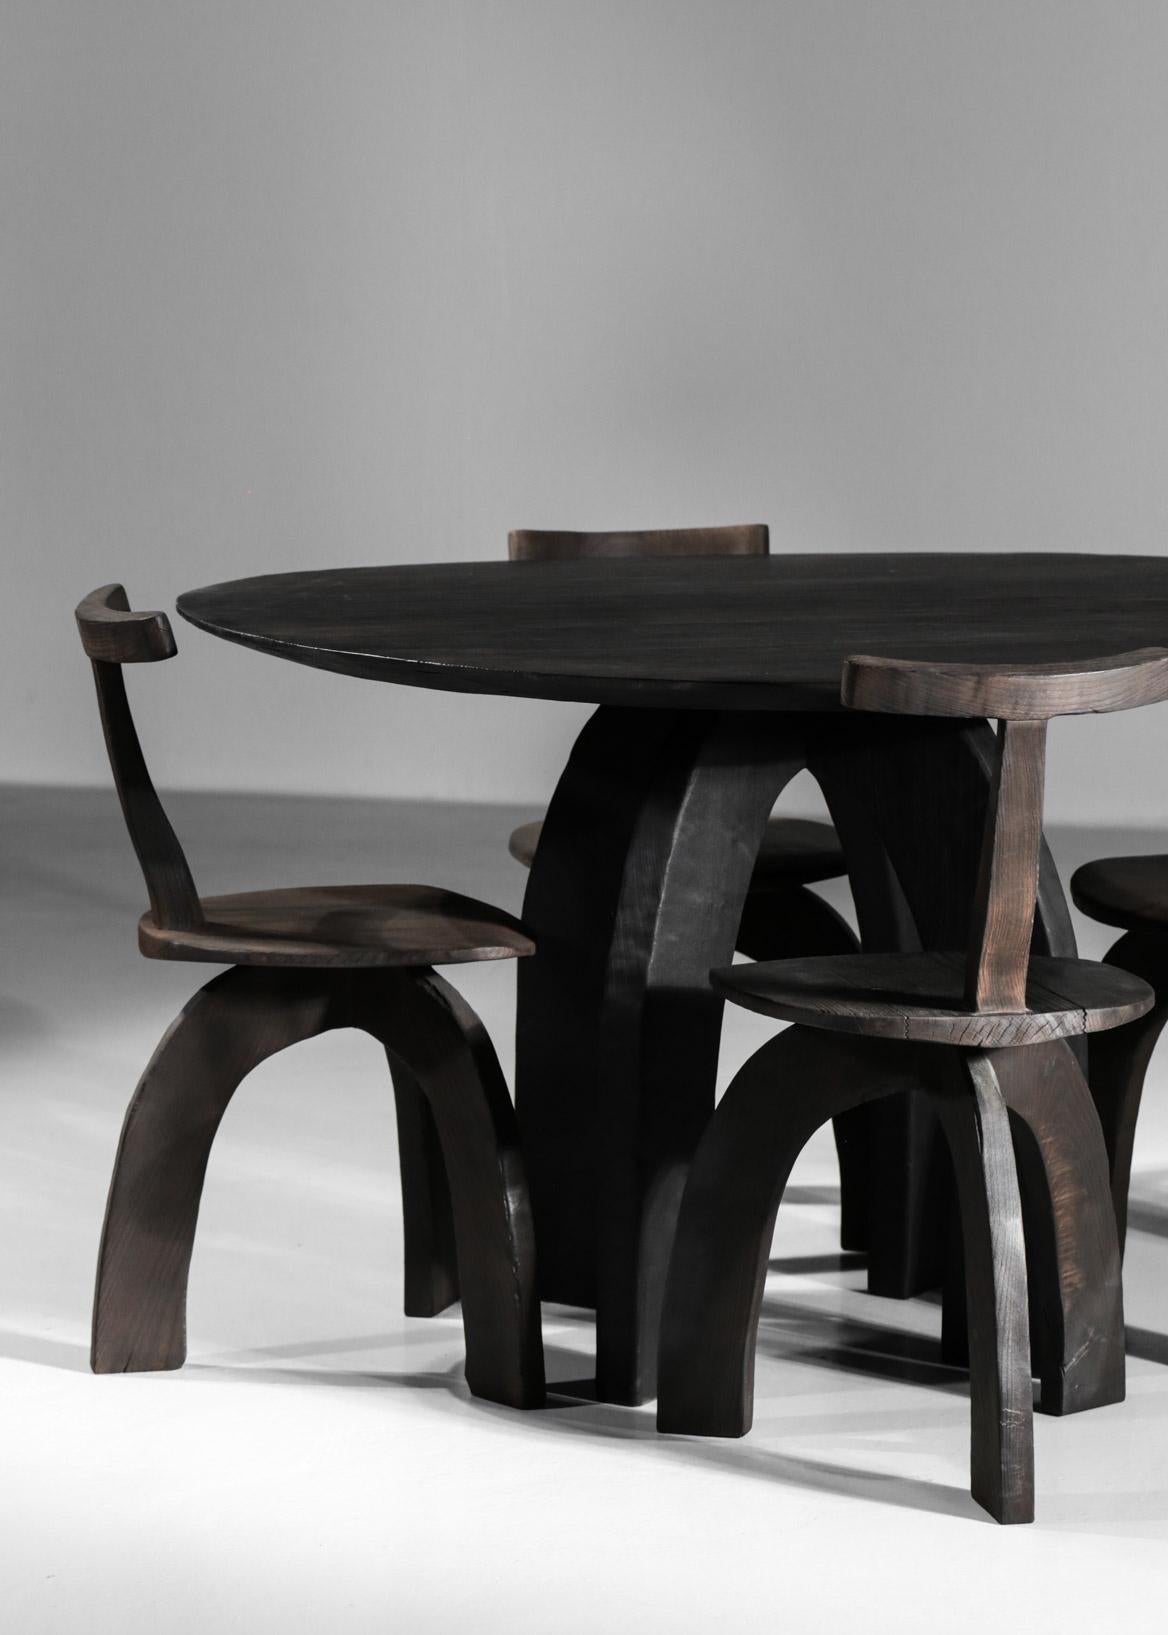 Organic Modern Artisanal Dining Set Round Table and Chairs by Vincent Vincent 80/20 Burnt Wood For Sale